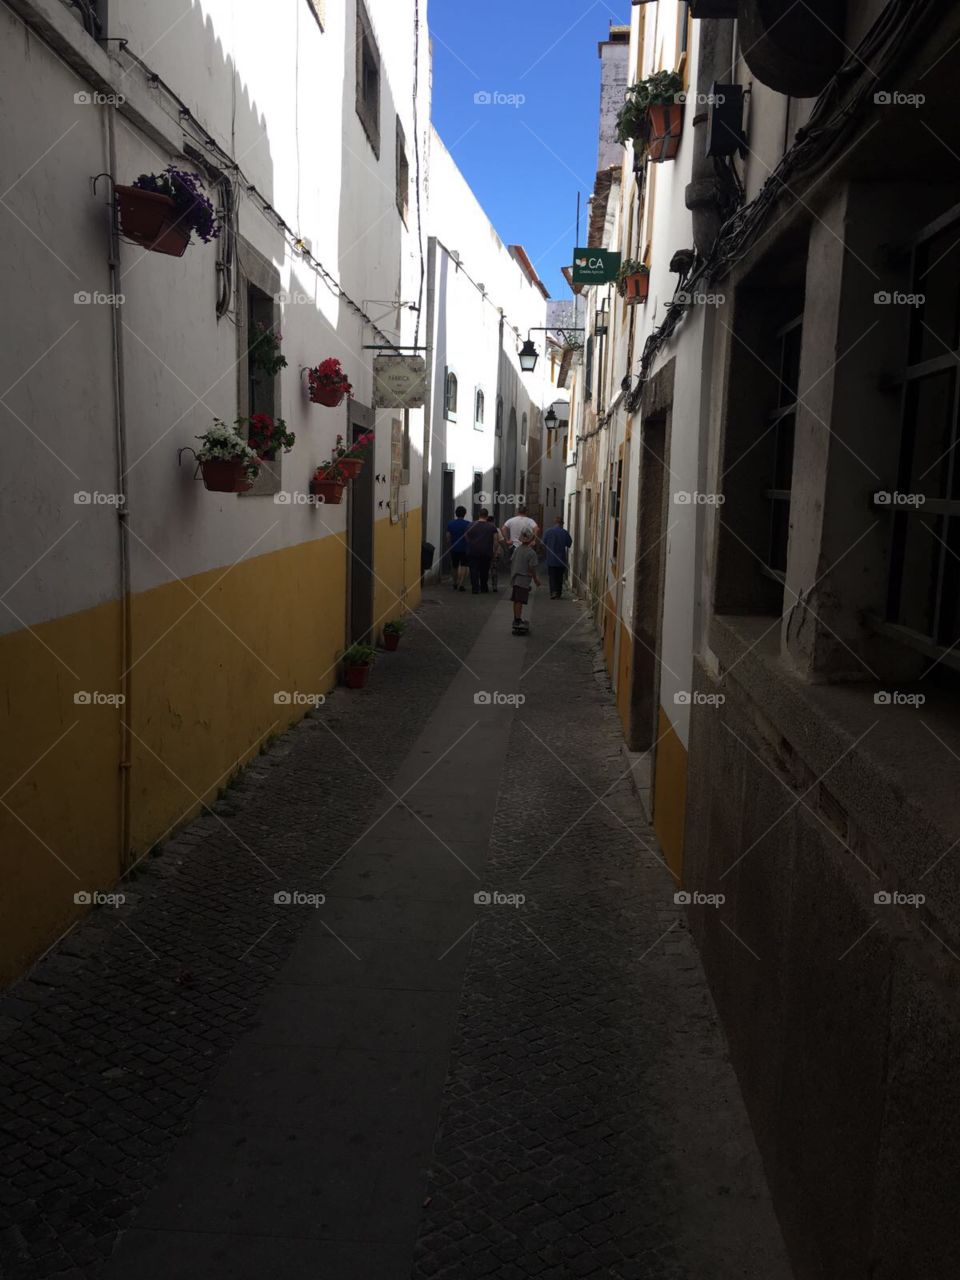 Portugal streets